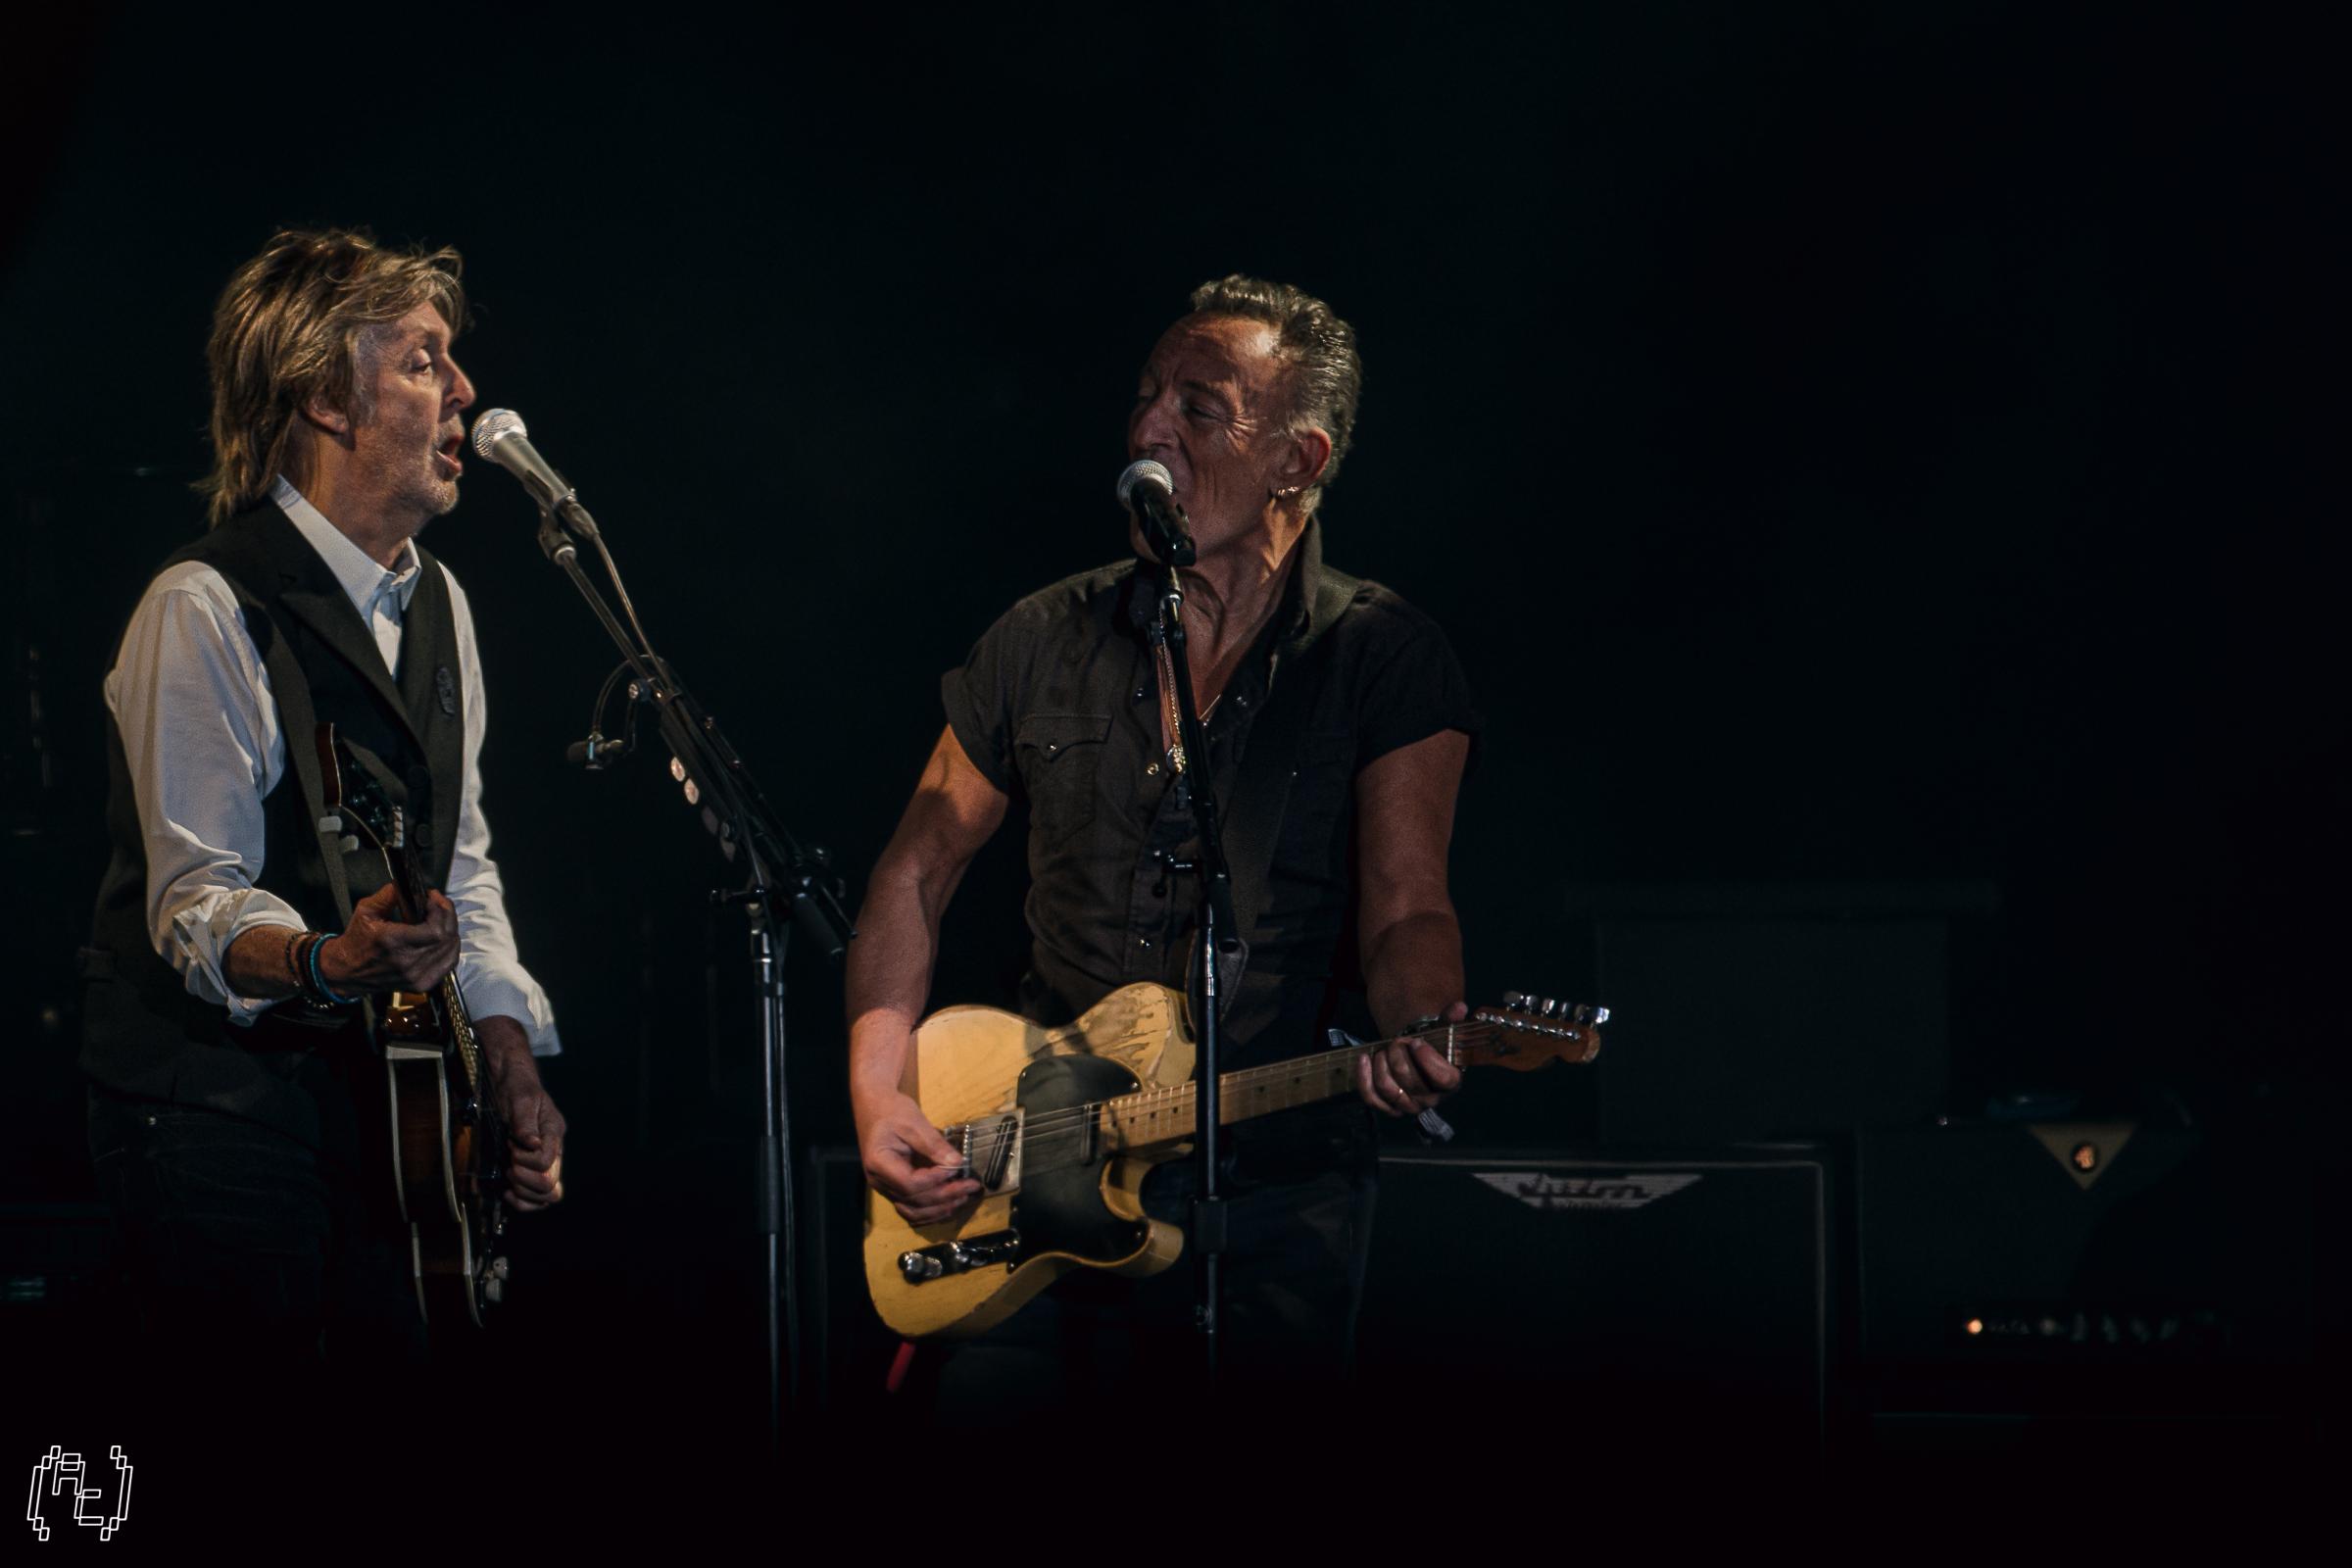 Sir Paul McCartney and Bruce Springsteen at last years Glastonbury by Alex Cropper